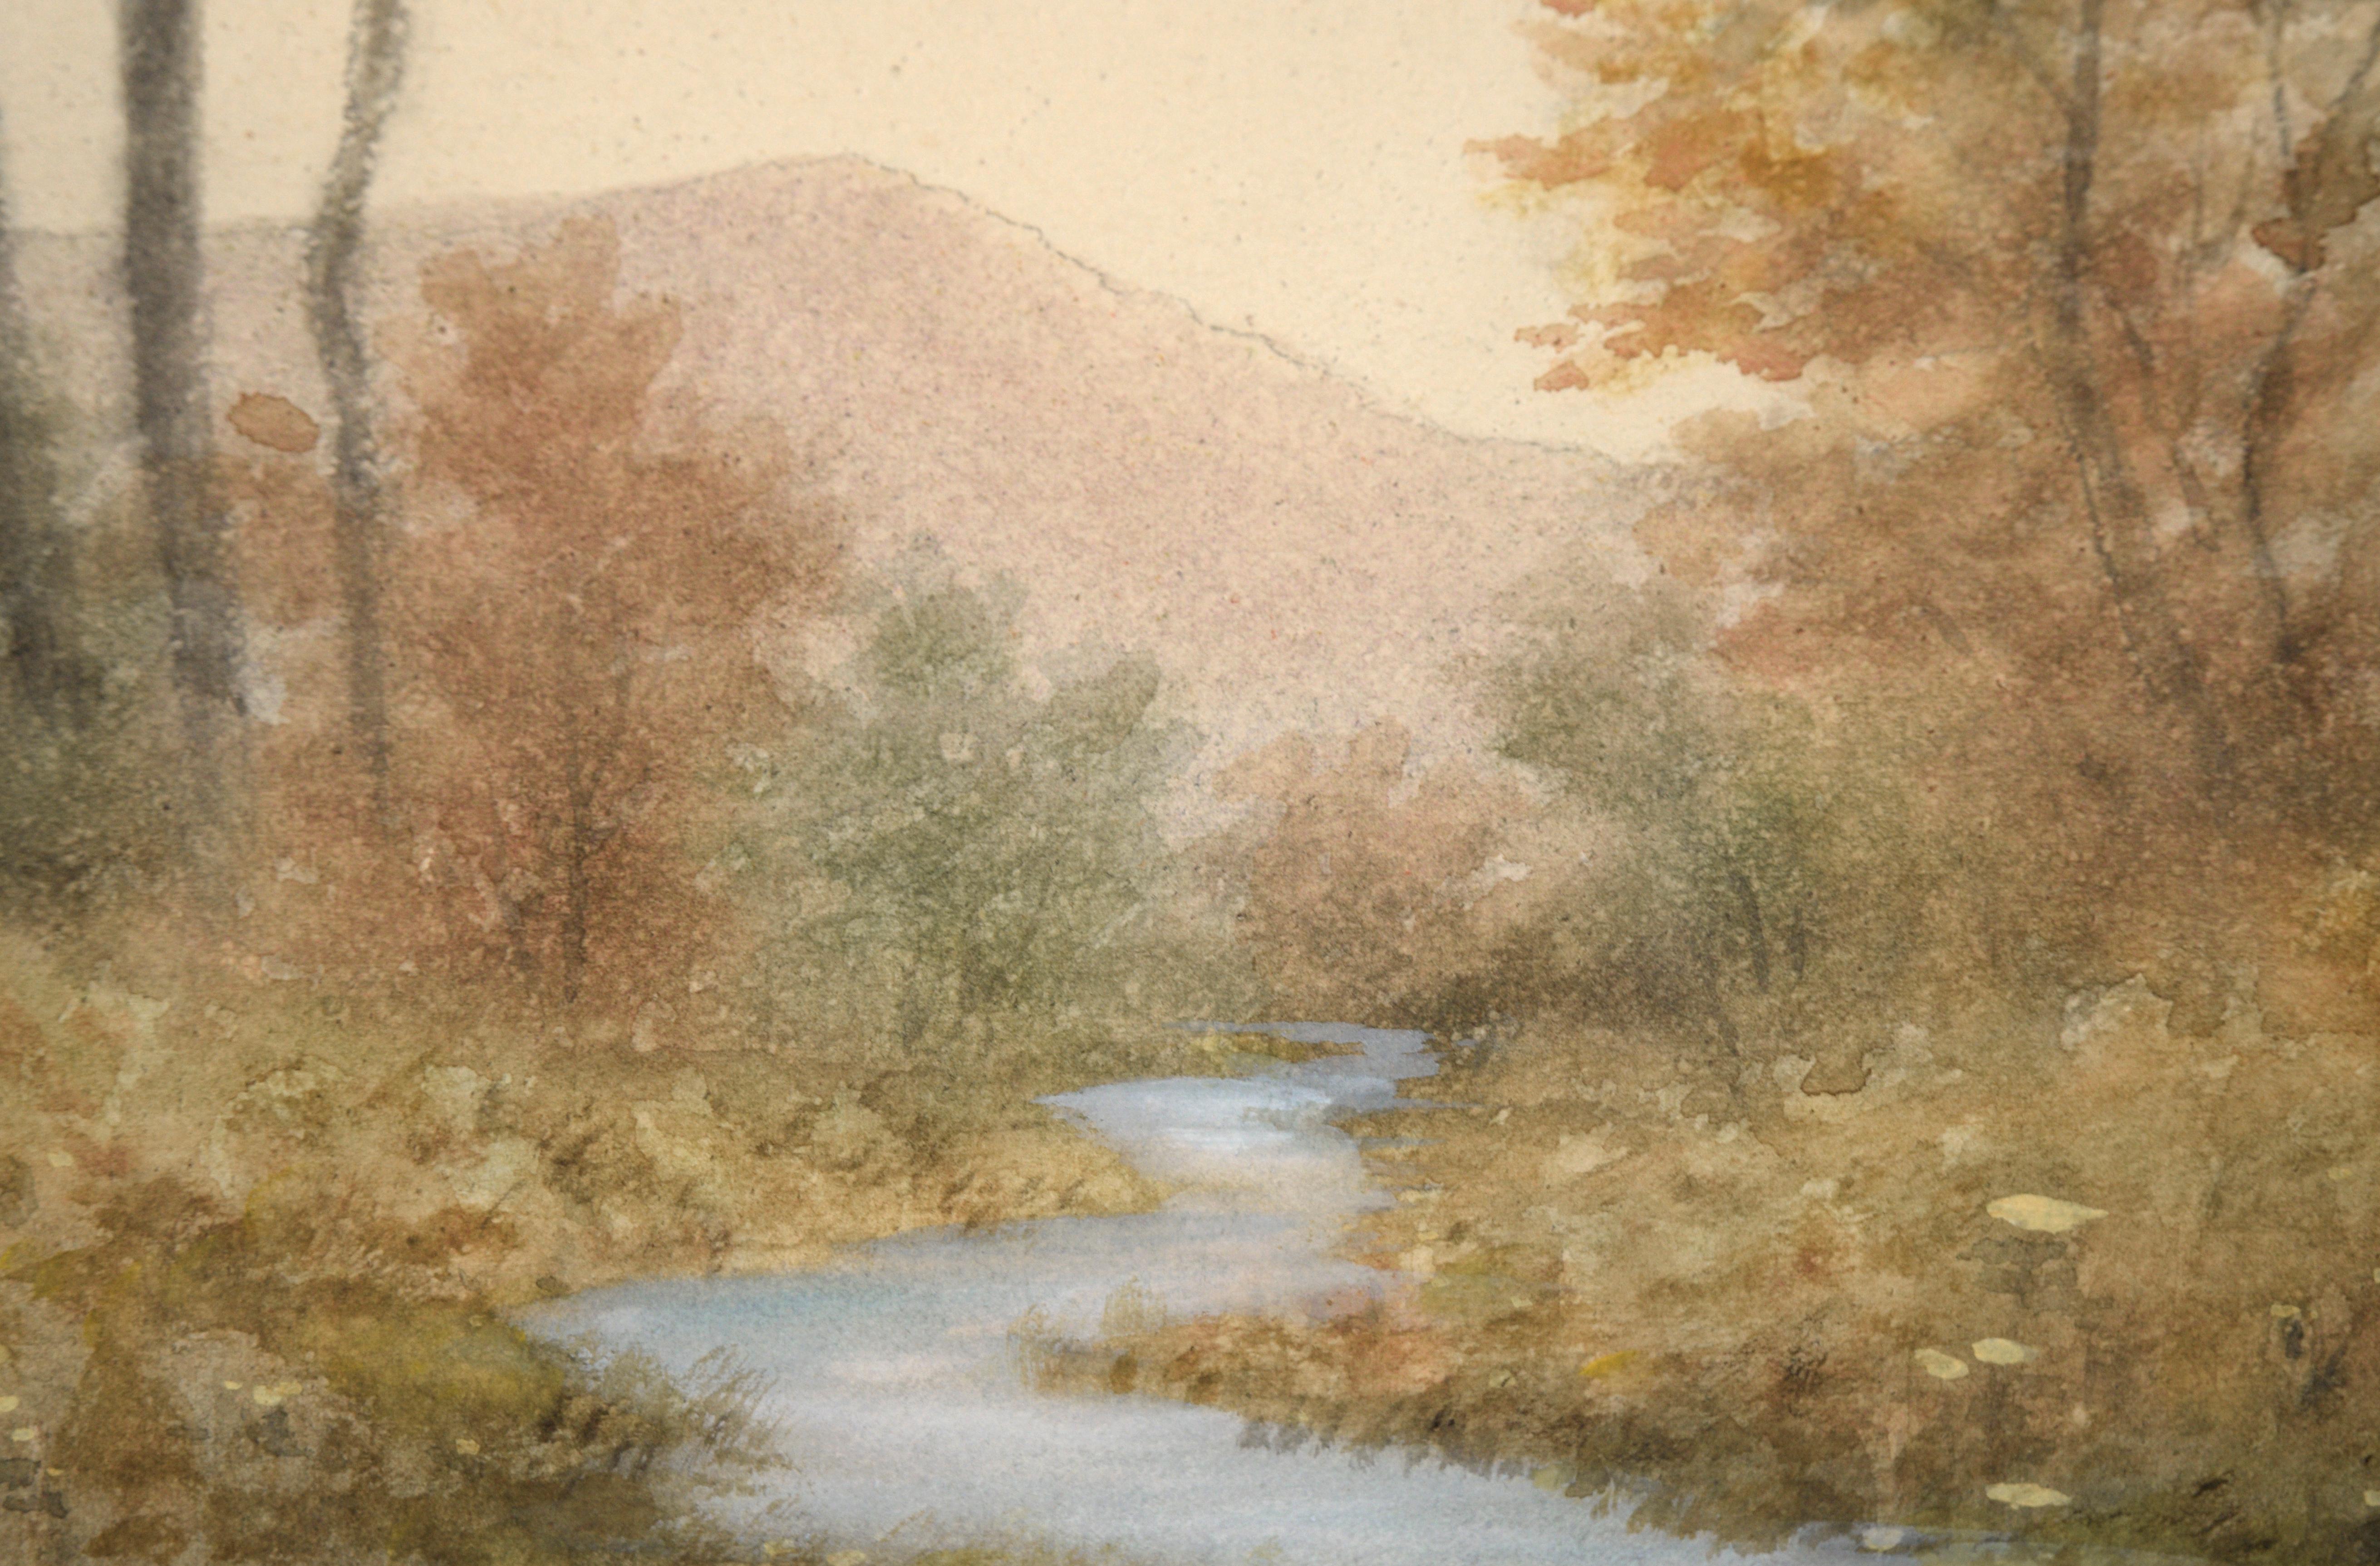 Subtly-toned autumn scene by Sydney Cooper (American, 19th-20th C.). This is piece is composed of subdued fall tones - tan, pale green, and coppery reds. A blue stream cuts through the landscape and meanders into the the distance, dividing up the